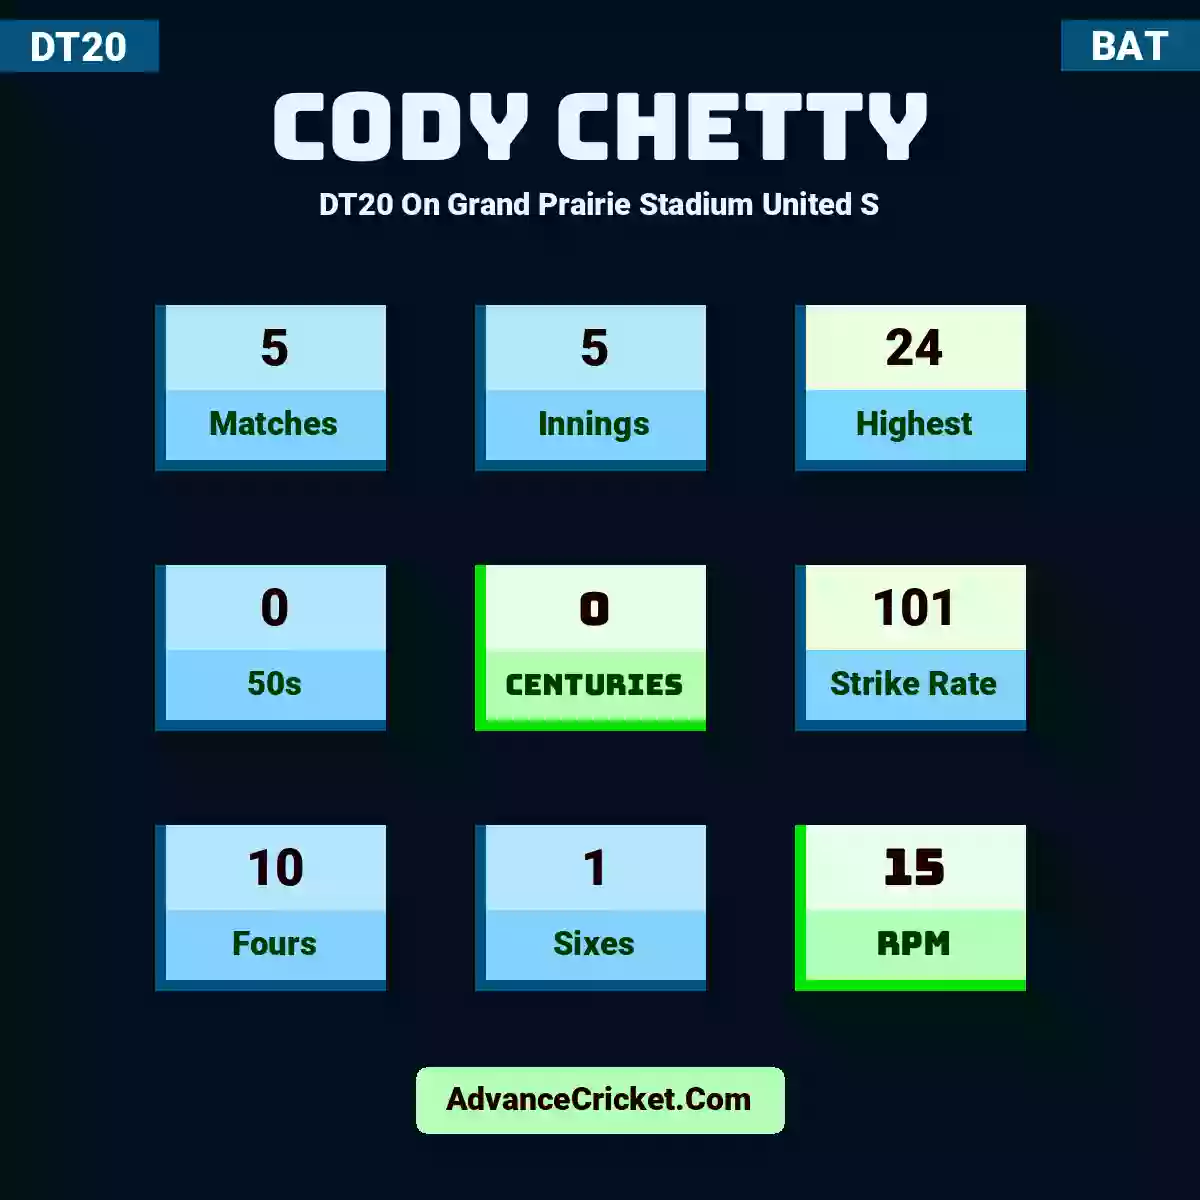 Cody Chetty DT20  On Grand Prairie Stadium United S, Cody Chetty played 5 matches, scored 24 runs as highest, 0 half-centuries, and 0 centuries, with a strike rate of 101. C.Chetty hit 10 fours and 1 sixes, with an RPM of 15.